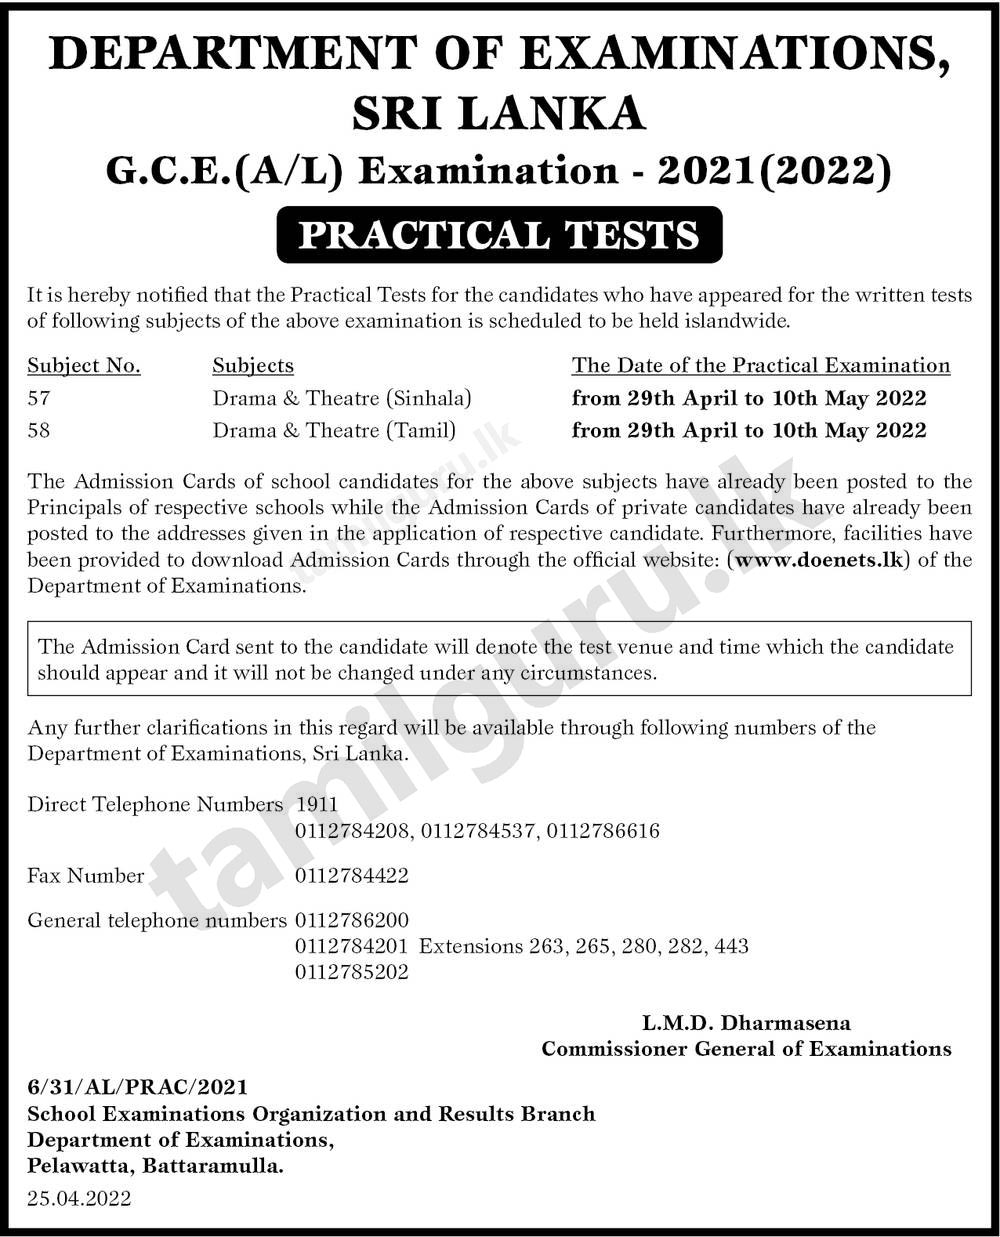 Admission Card for Practical Tests (Drama & Theatre) - G.C.E A/L Examination - 2021 (2022) (Details in English)